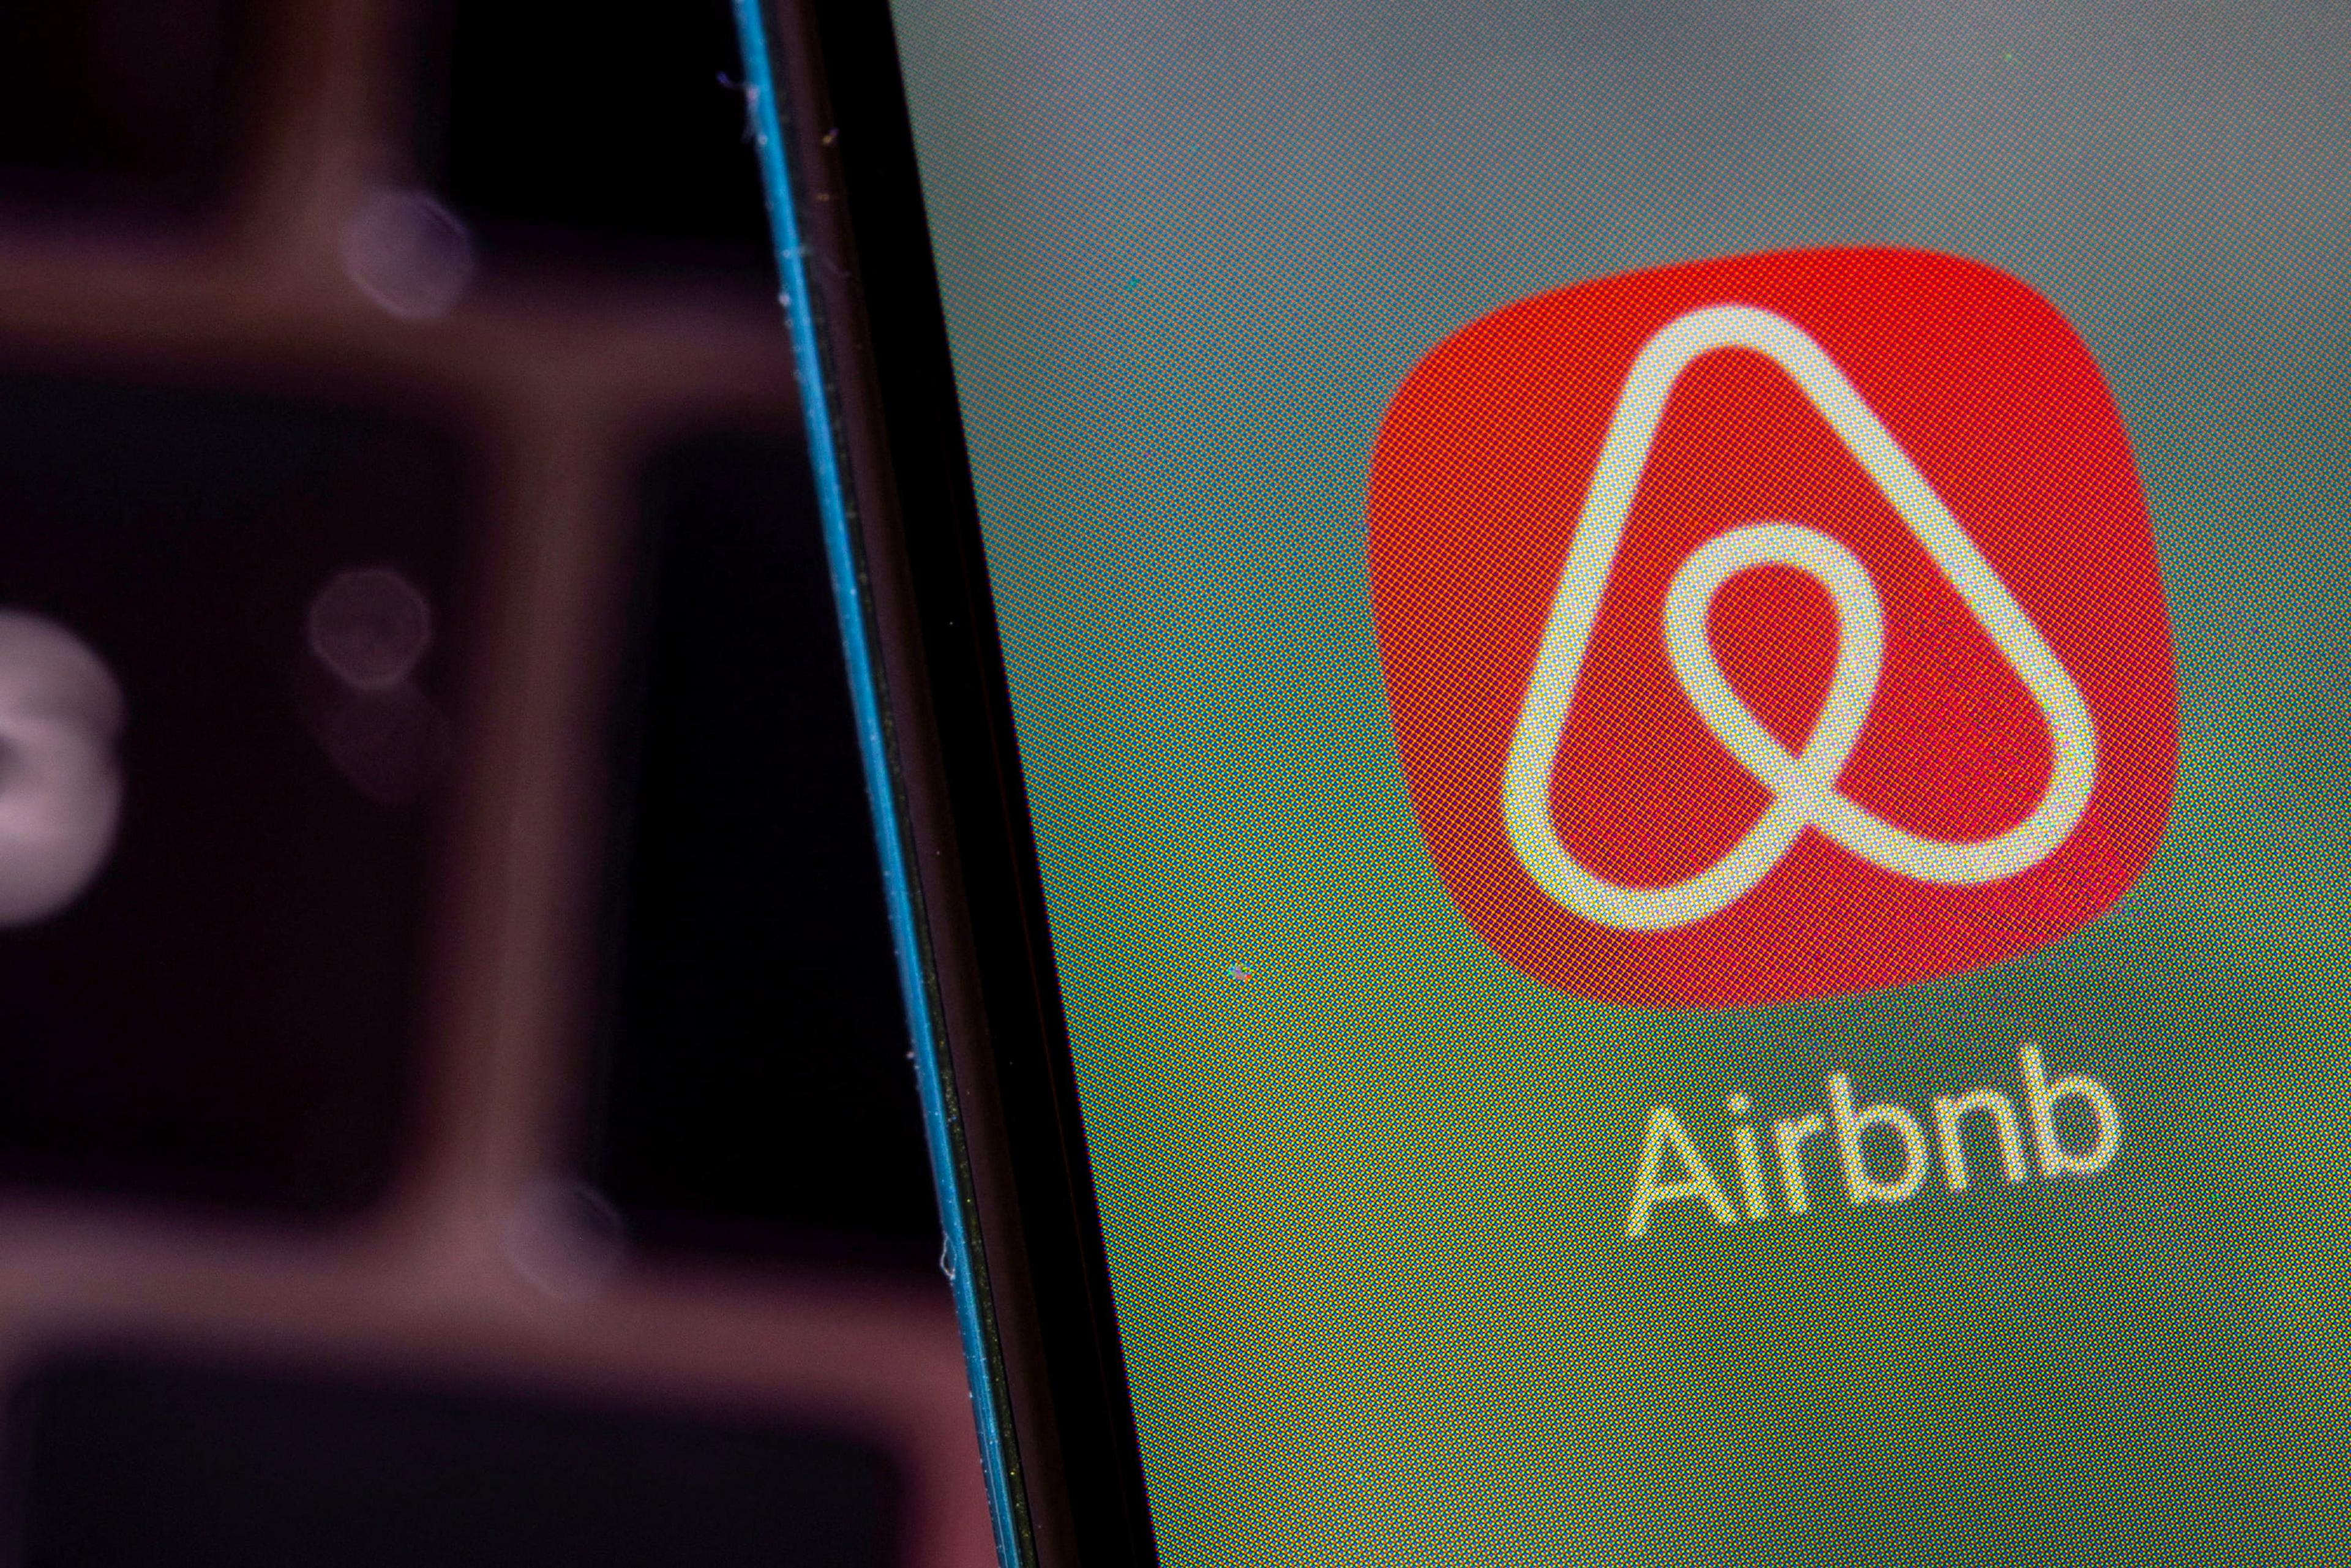 Airbnb: Guests Contributed $4.4 Billion to Los Angeles Economy Last Year